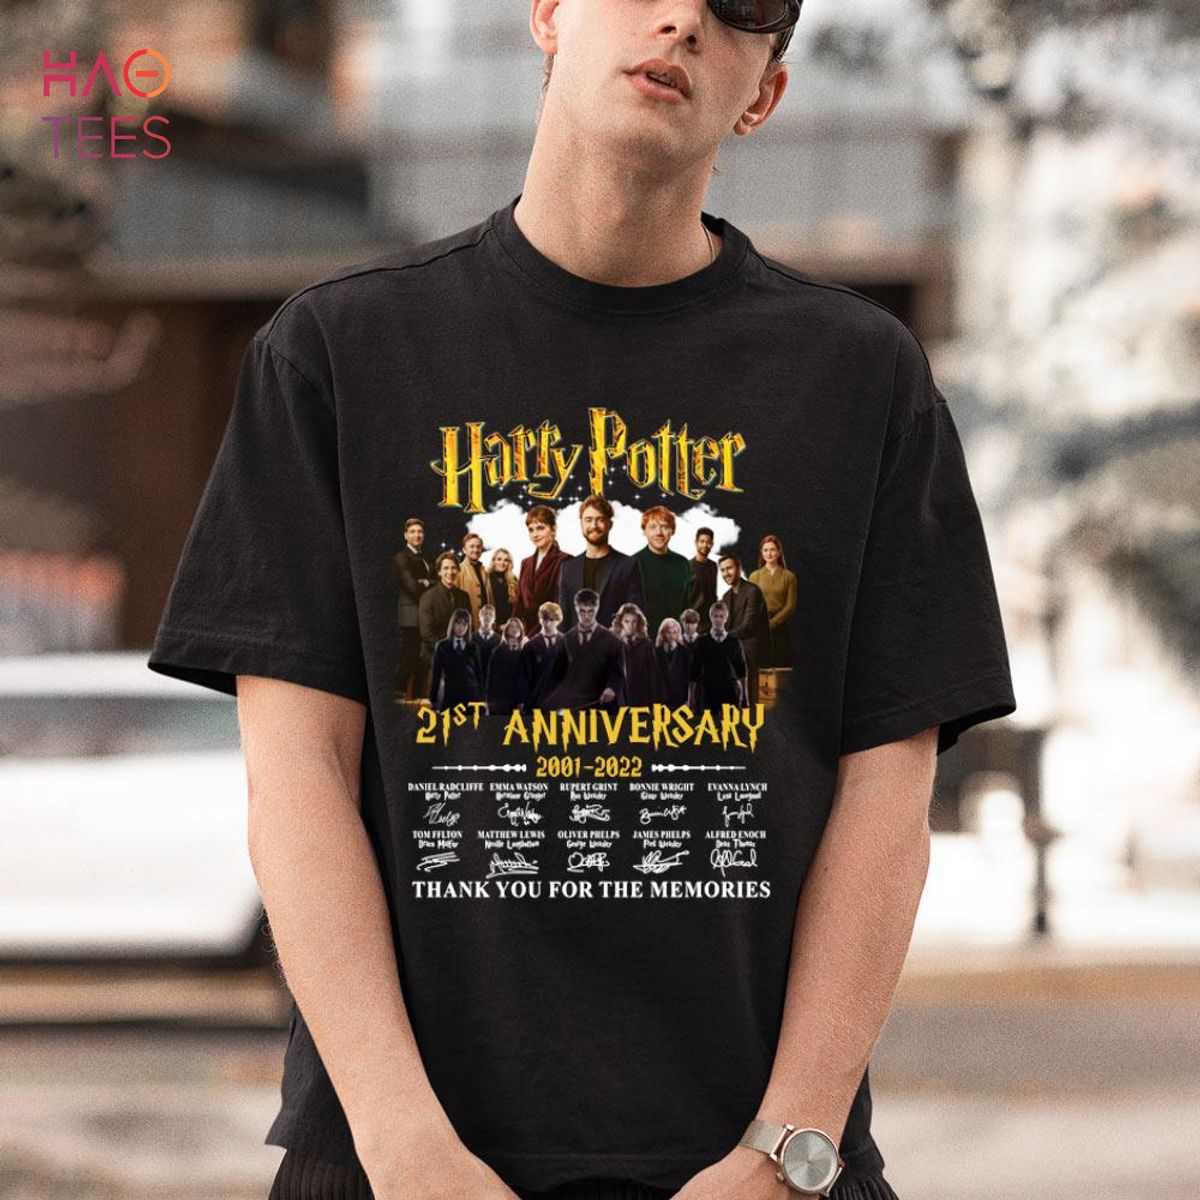 21st Anniversary 2001 2022 Harry Potter Signatures Thank You For The Memories Shirt